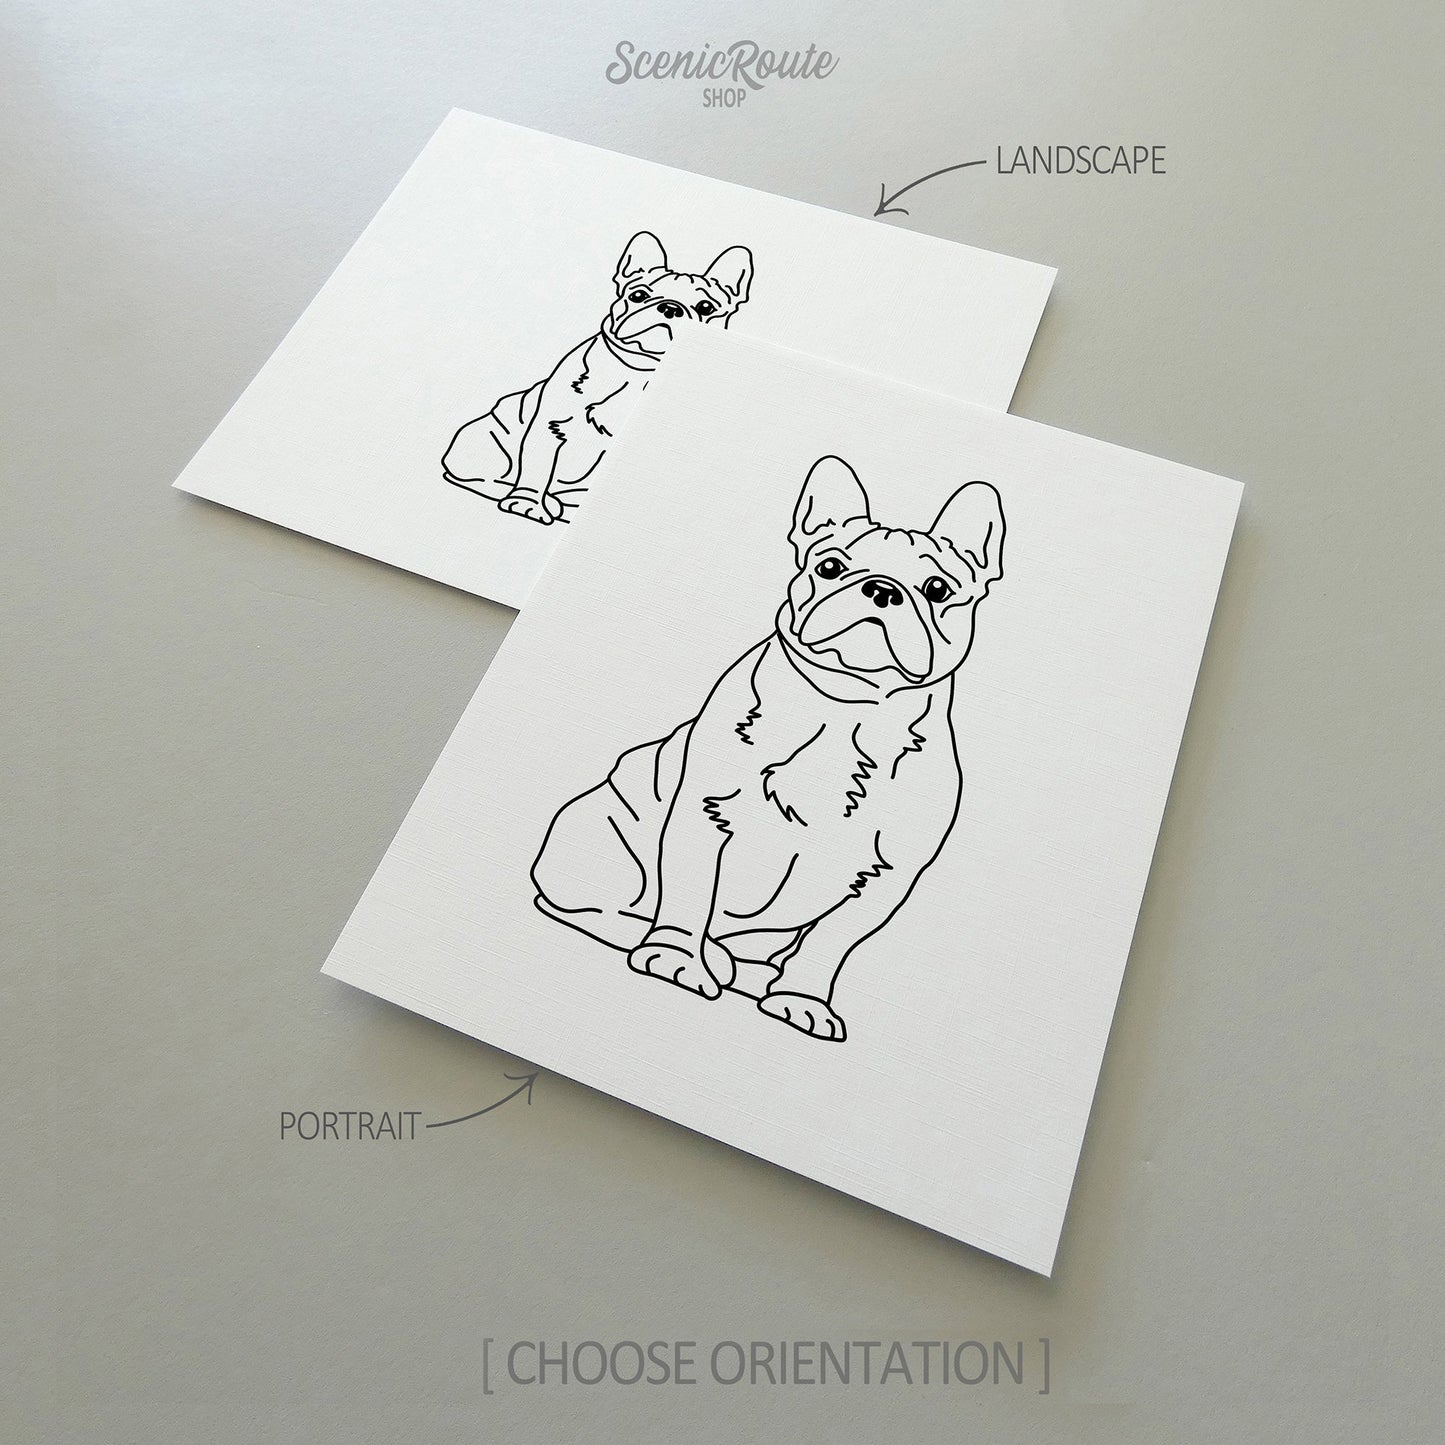 Two drawings of a French Bulldog dog on white linen paper with a gray background.  Pieces are shown in portrait and landscape orientation options to illustrate the available art print options.